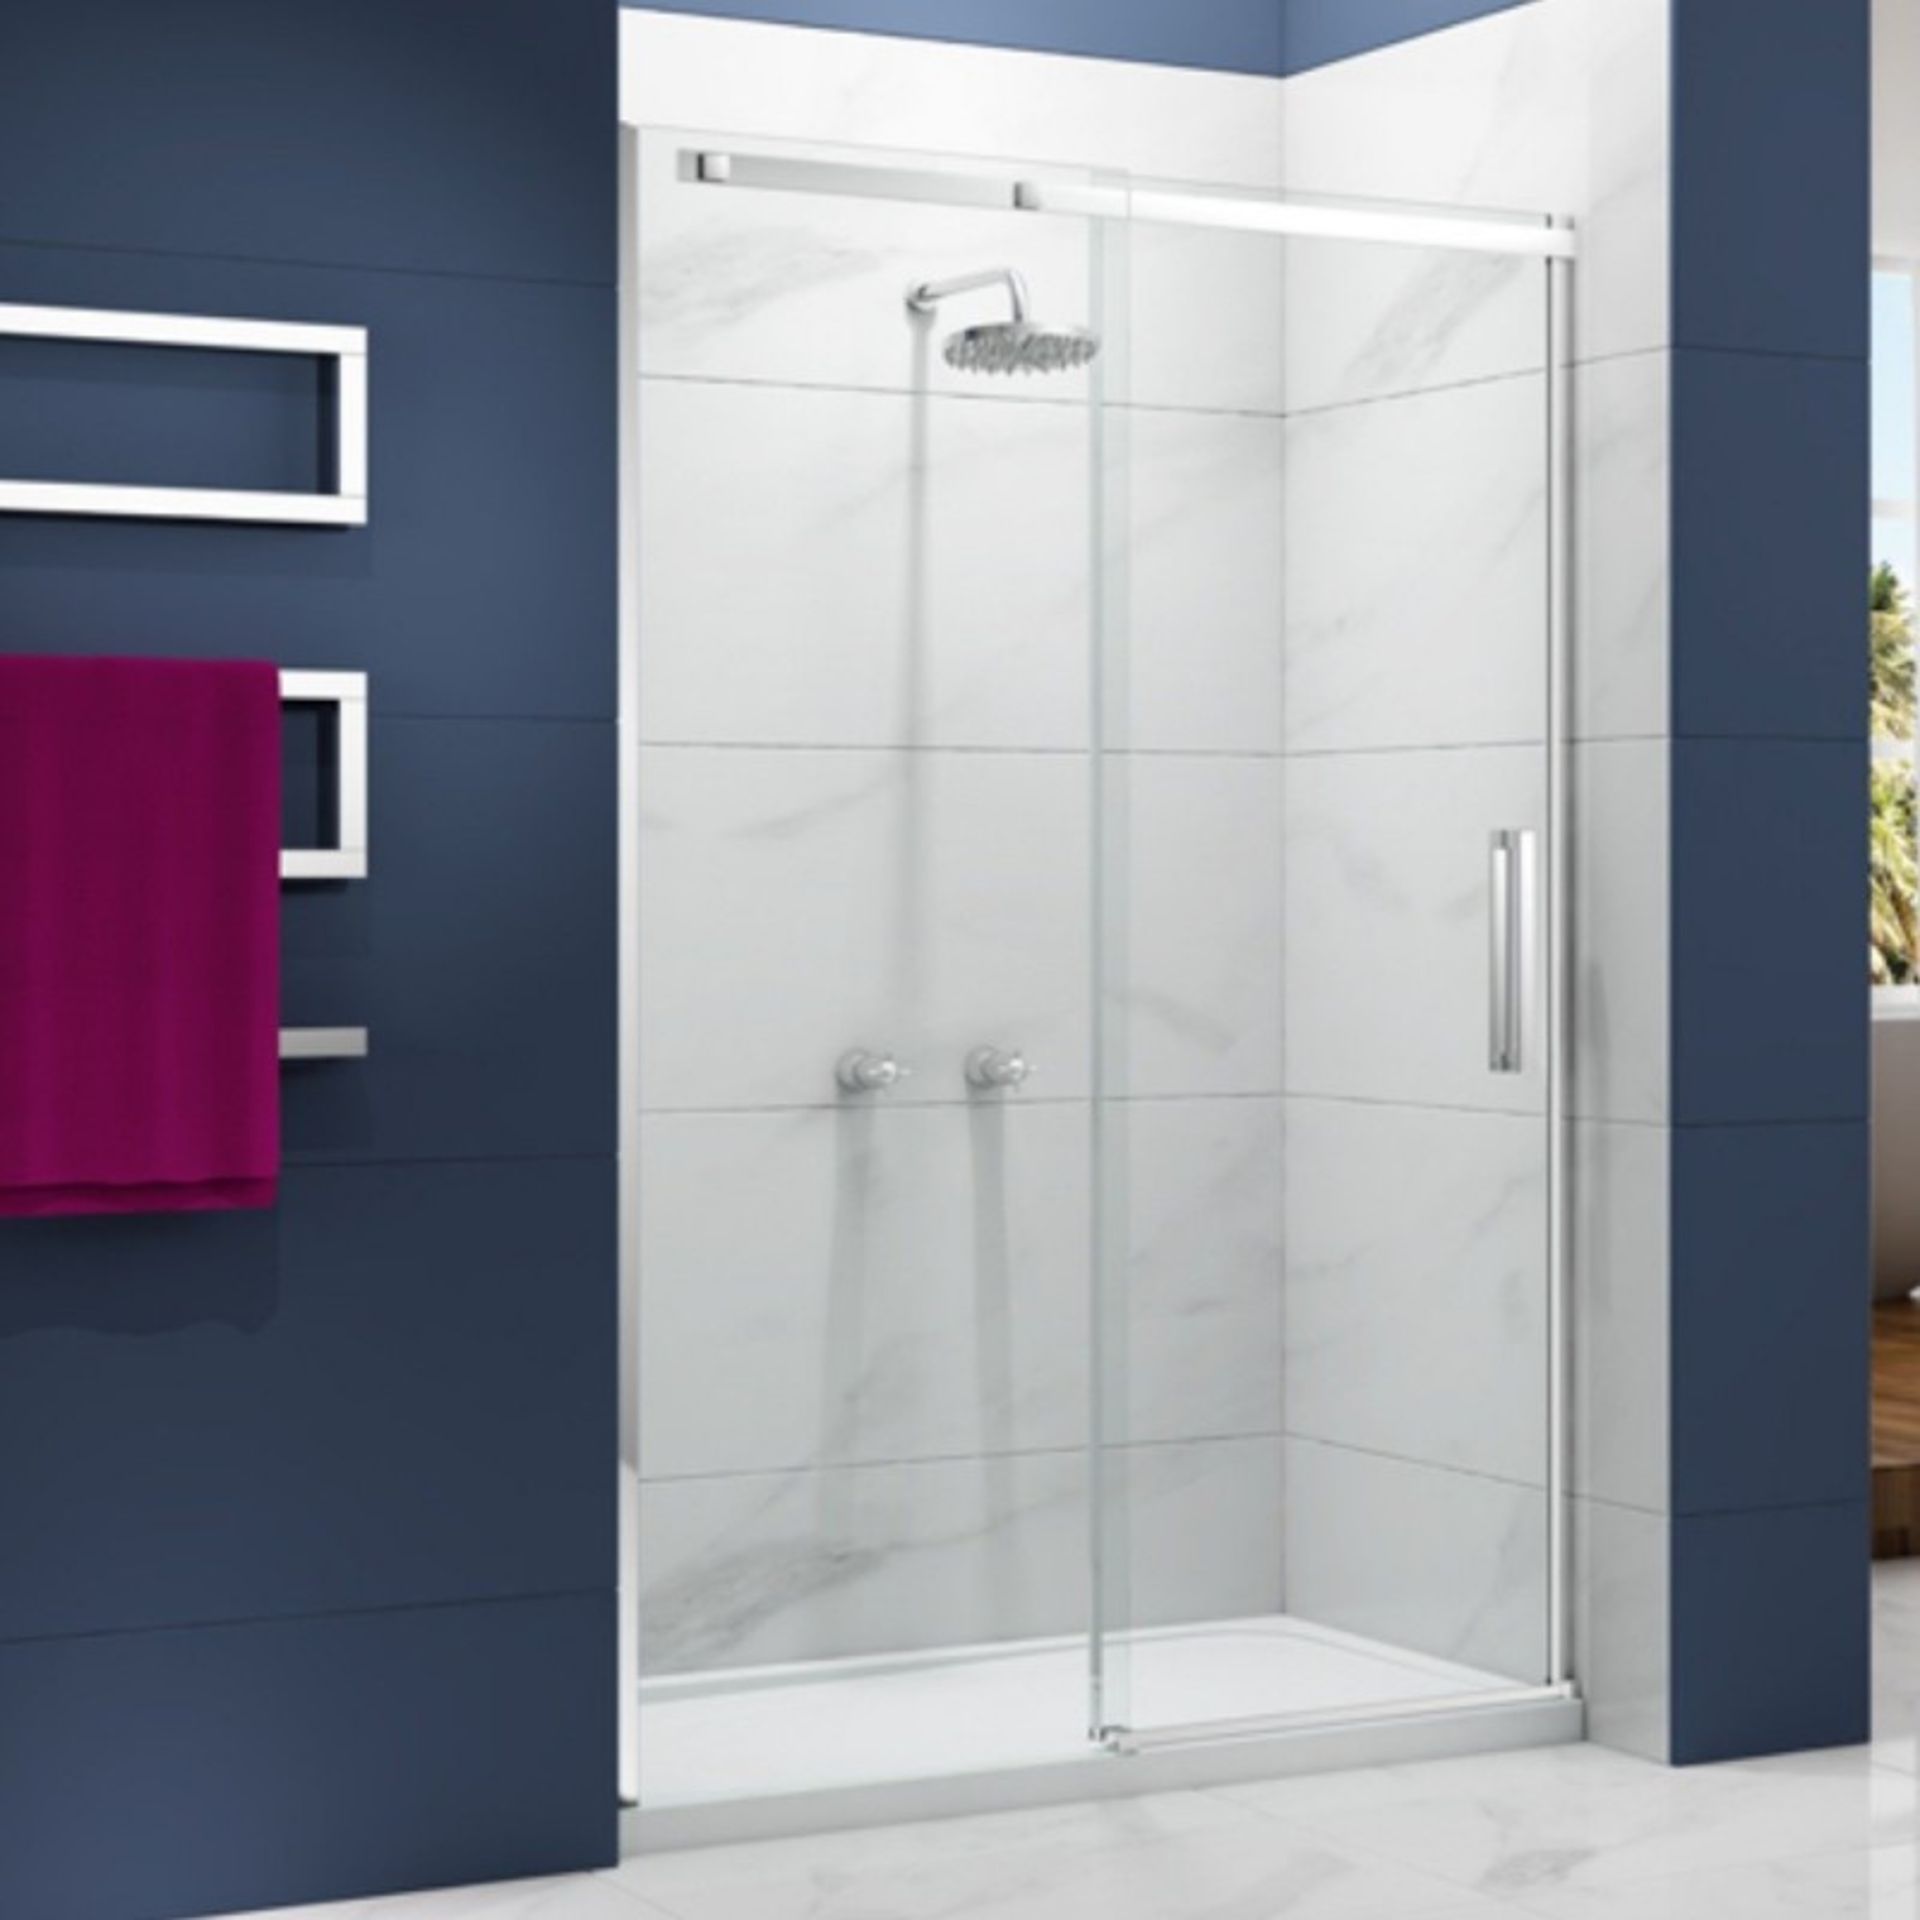 New Twyford's 1700mm - 6mm - Sliding Door Shower Enclosure. RRP £763.99.6mm Safety Glass Full... - Image 3 of 3